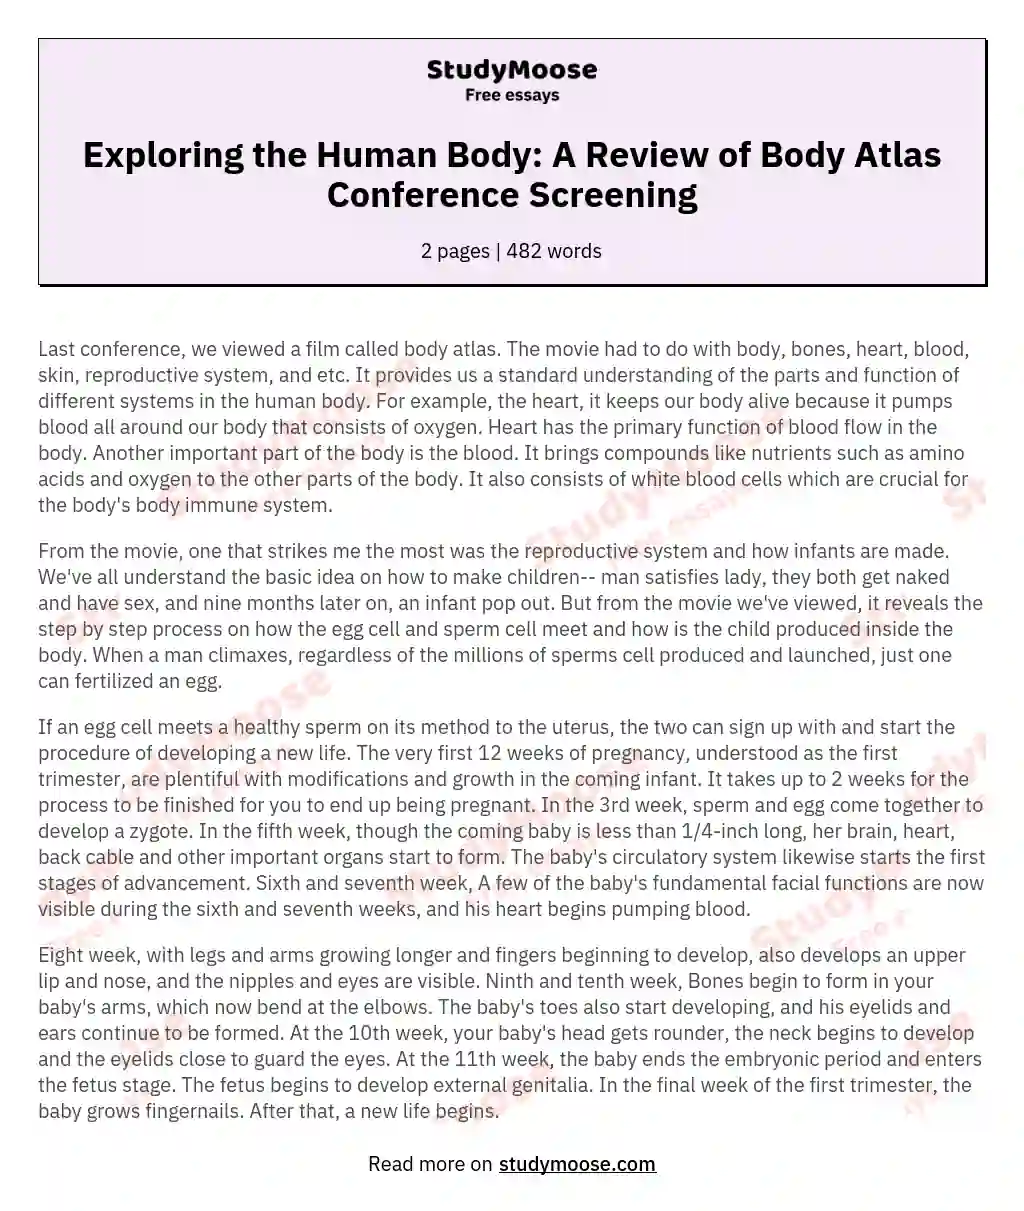 Exploring the Human Body: A Review of Body Atlas Conference Screening essay